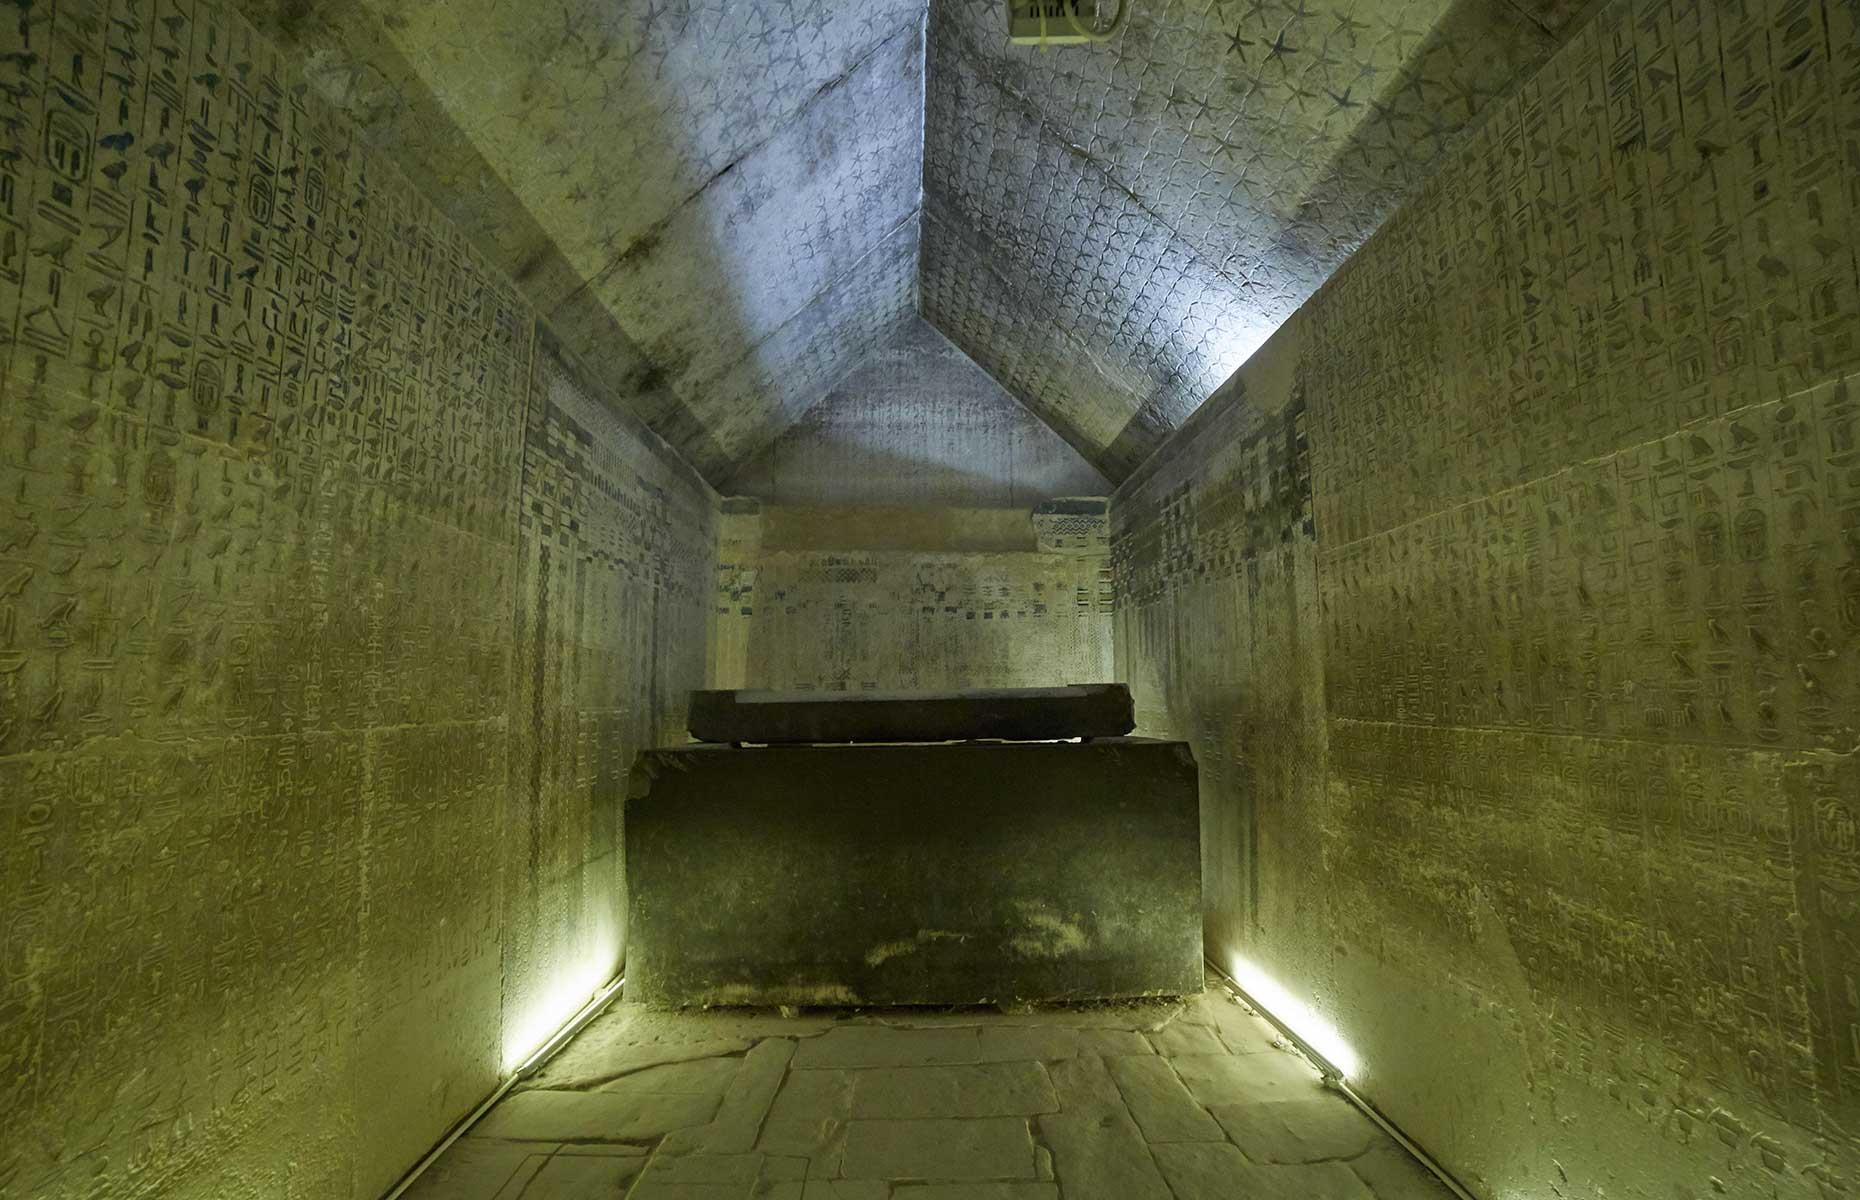 <p>Inside King Unas's burial chamber was the sarcophagus. The chamber's ceiling was beautifully patterned with gold stars against a night-blue sky. While the contents were robbed long before excavations could begin, the mummified remains of a left arm, hand and skull were found amongst the debris. Could these belong to the former pharaoh?  </p>